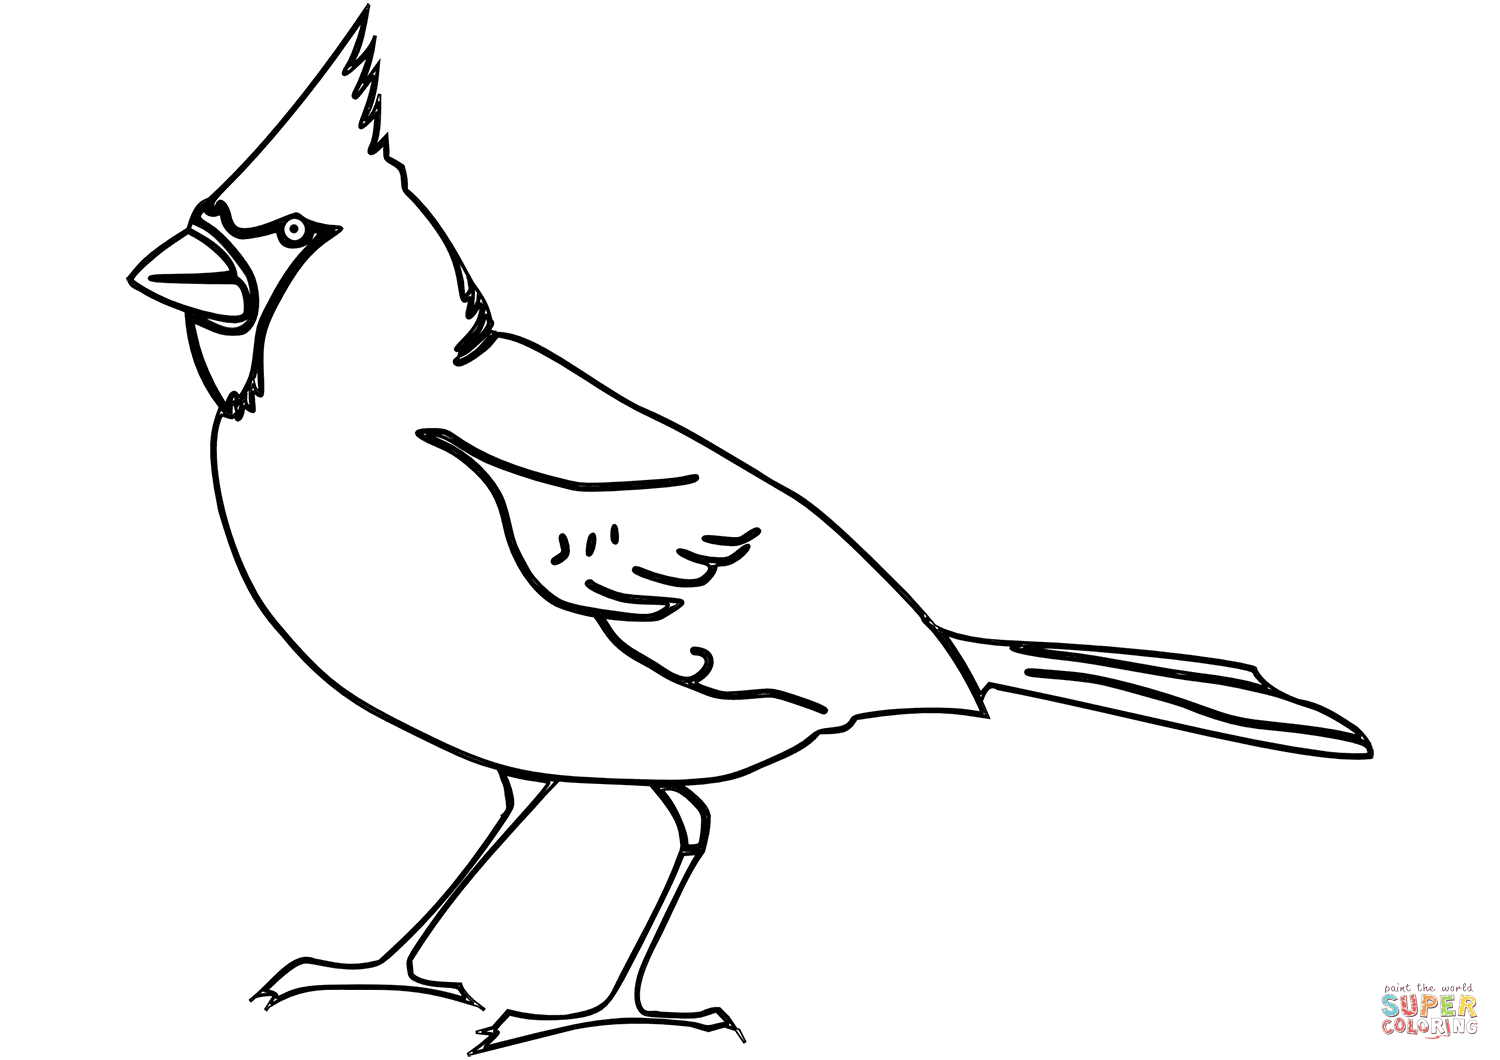 Northern cardinal coloring page free printable coloring pages bird coloring pages monster coloring pages coloring pictures